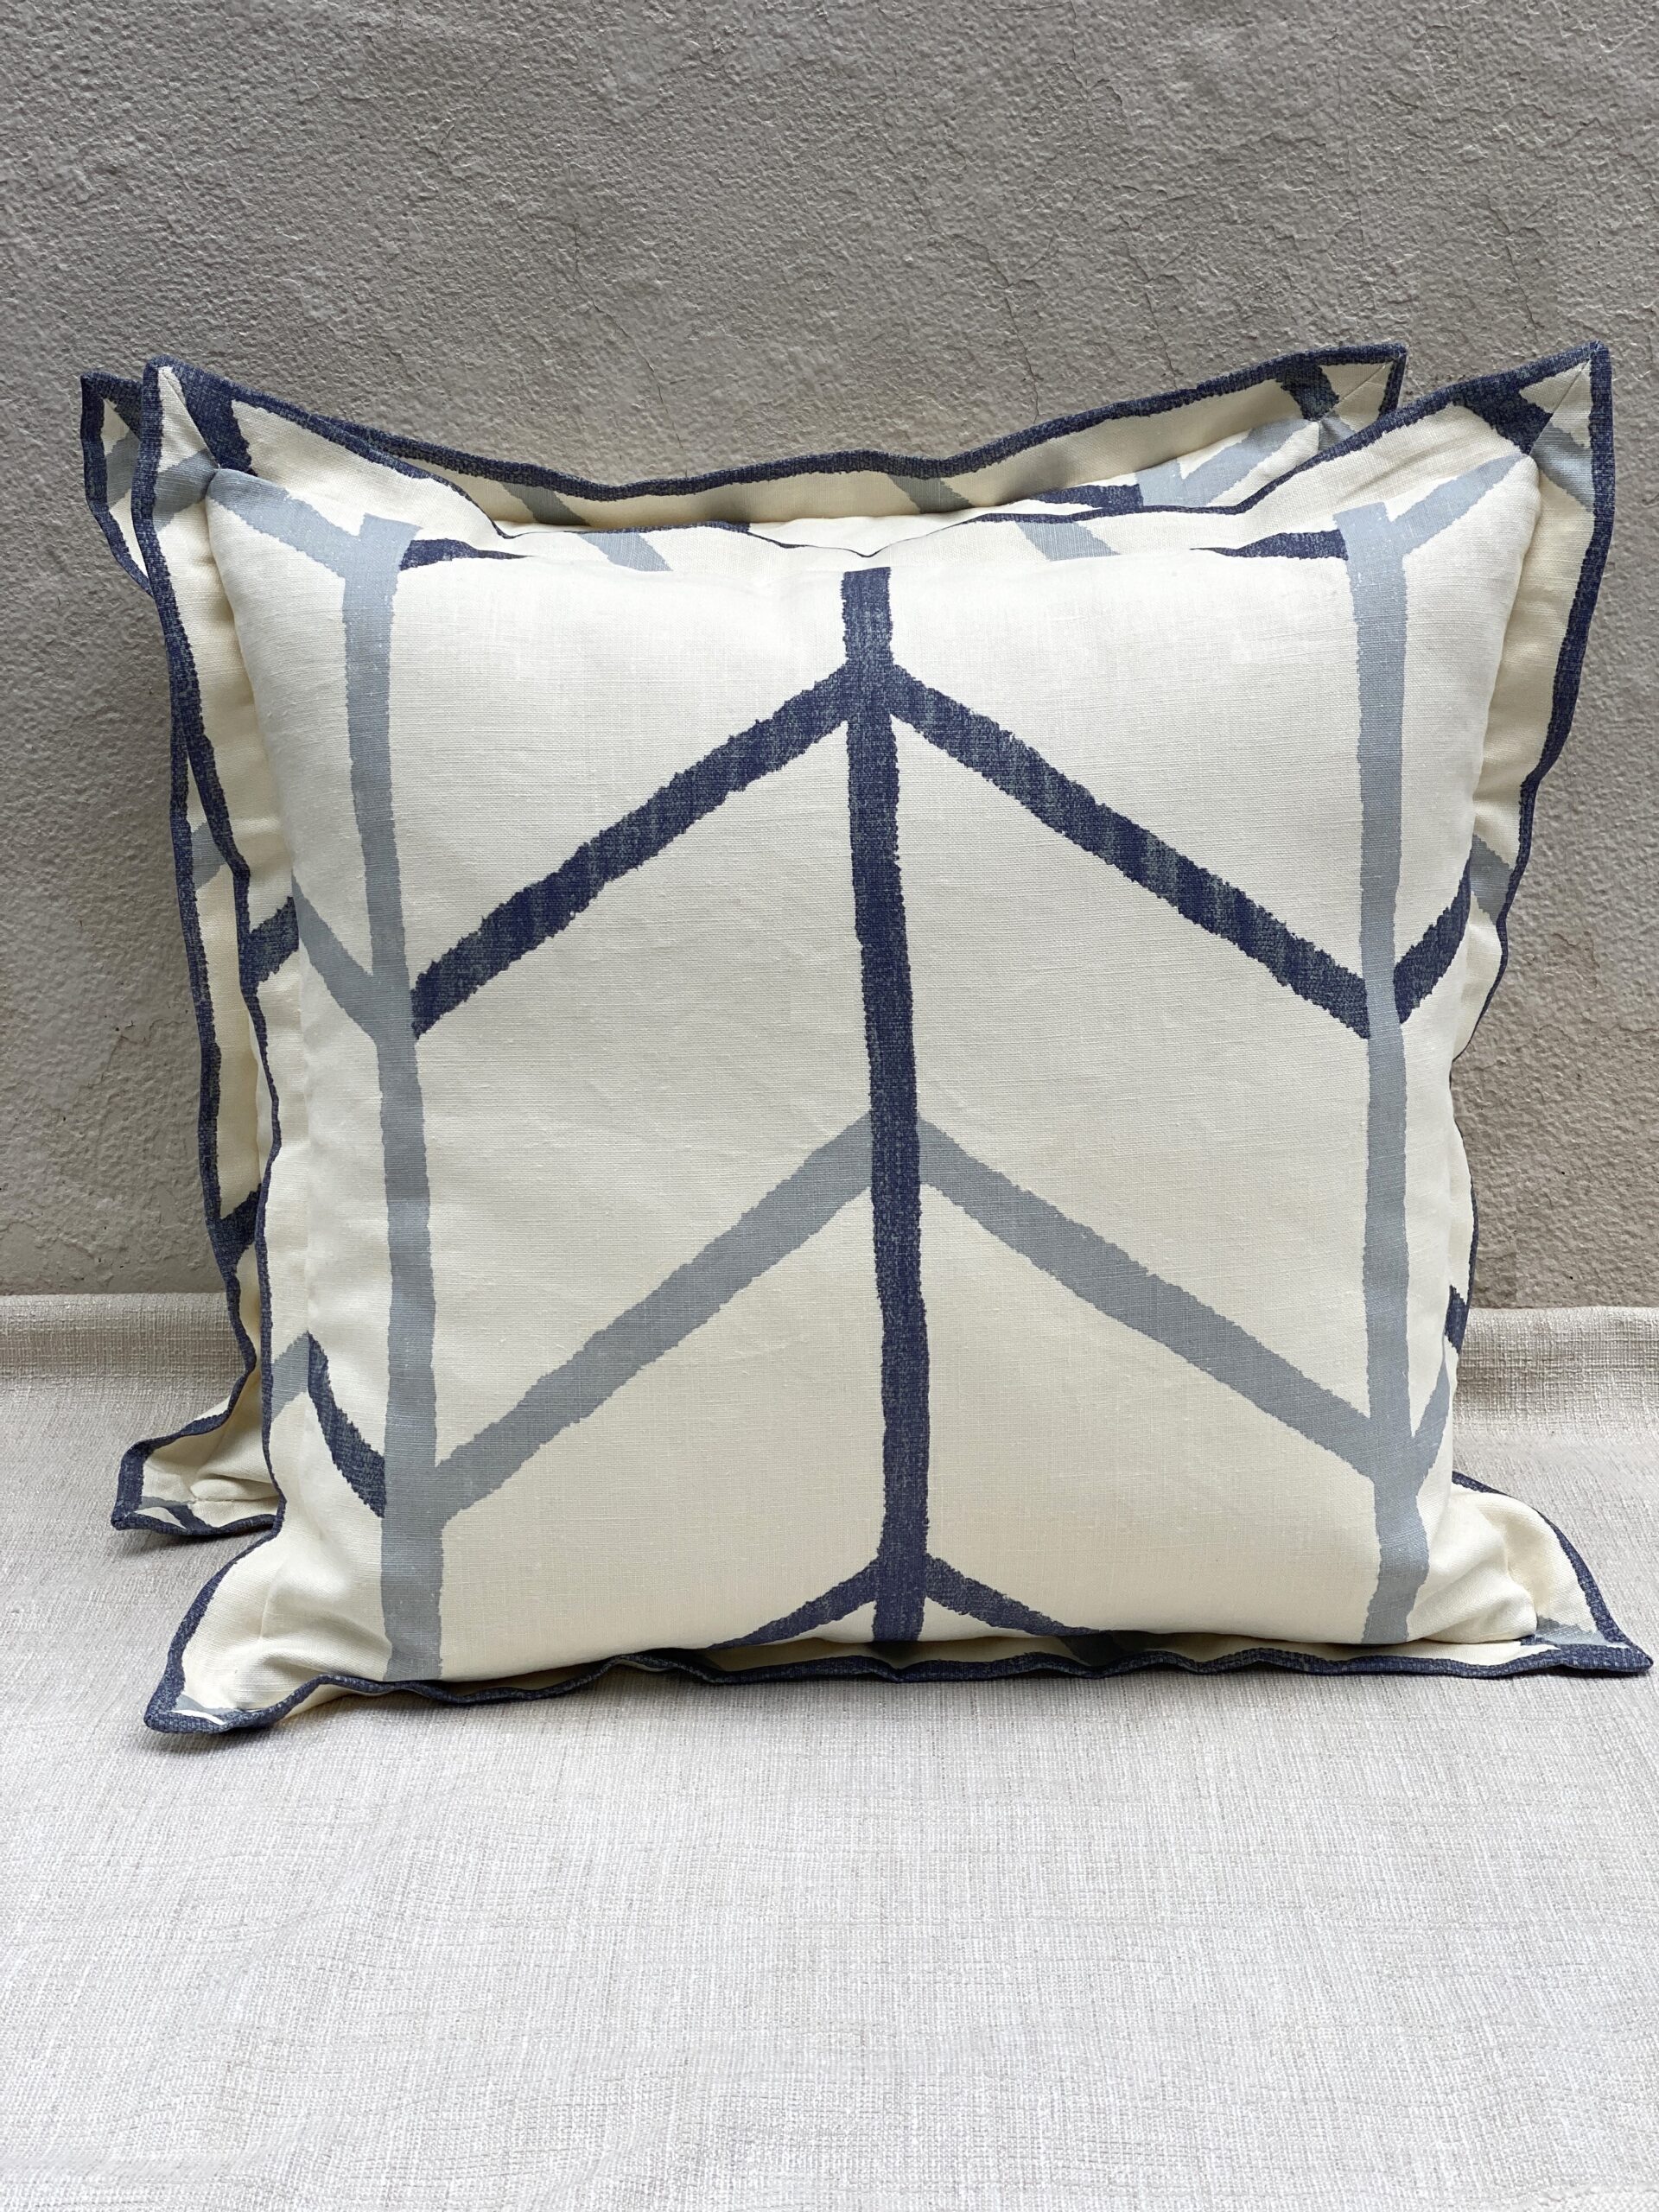 Christopher Farr Cloth One Way Pillows